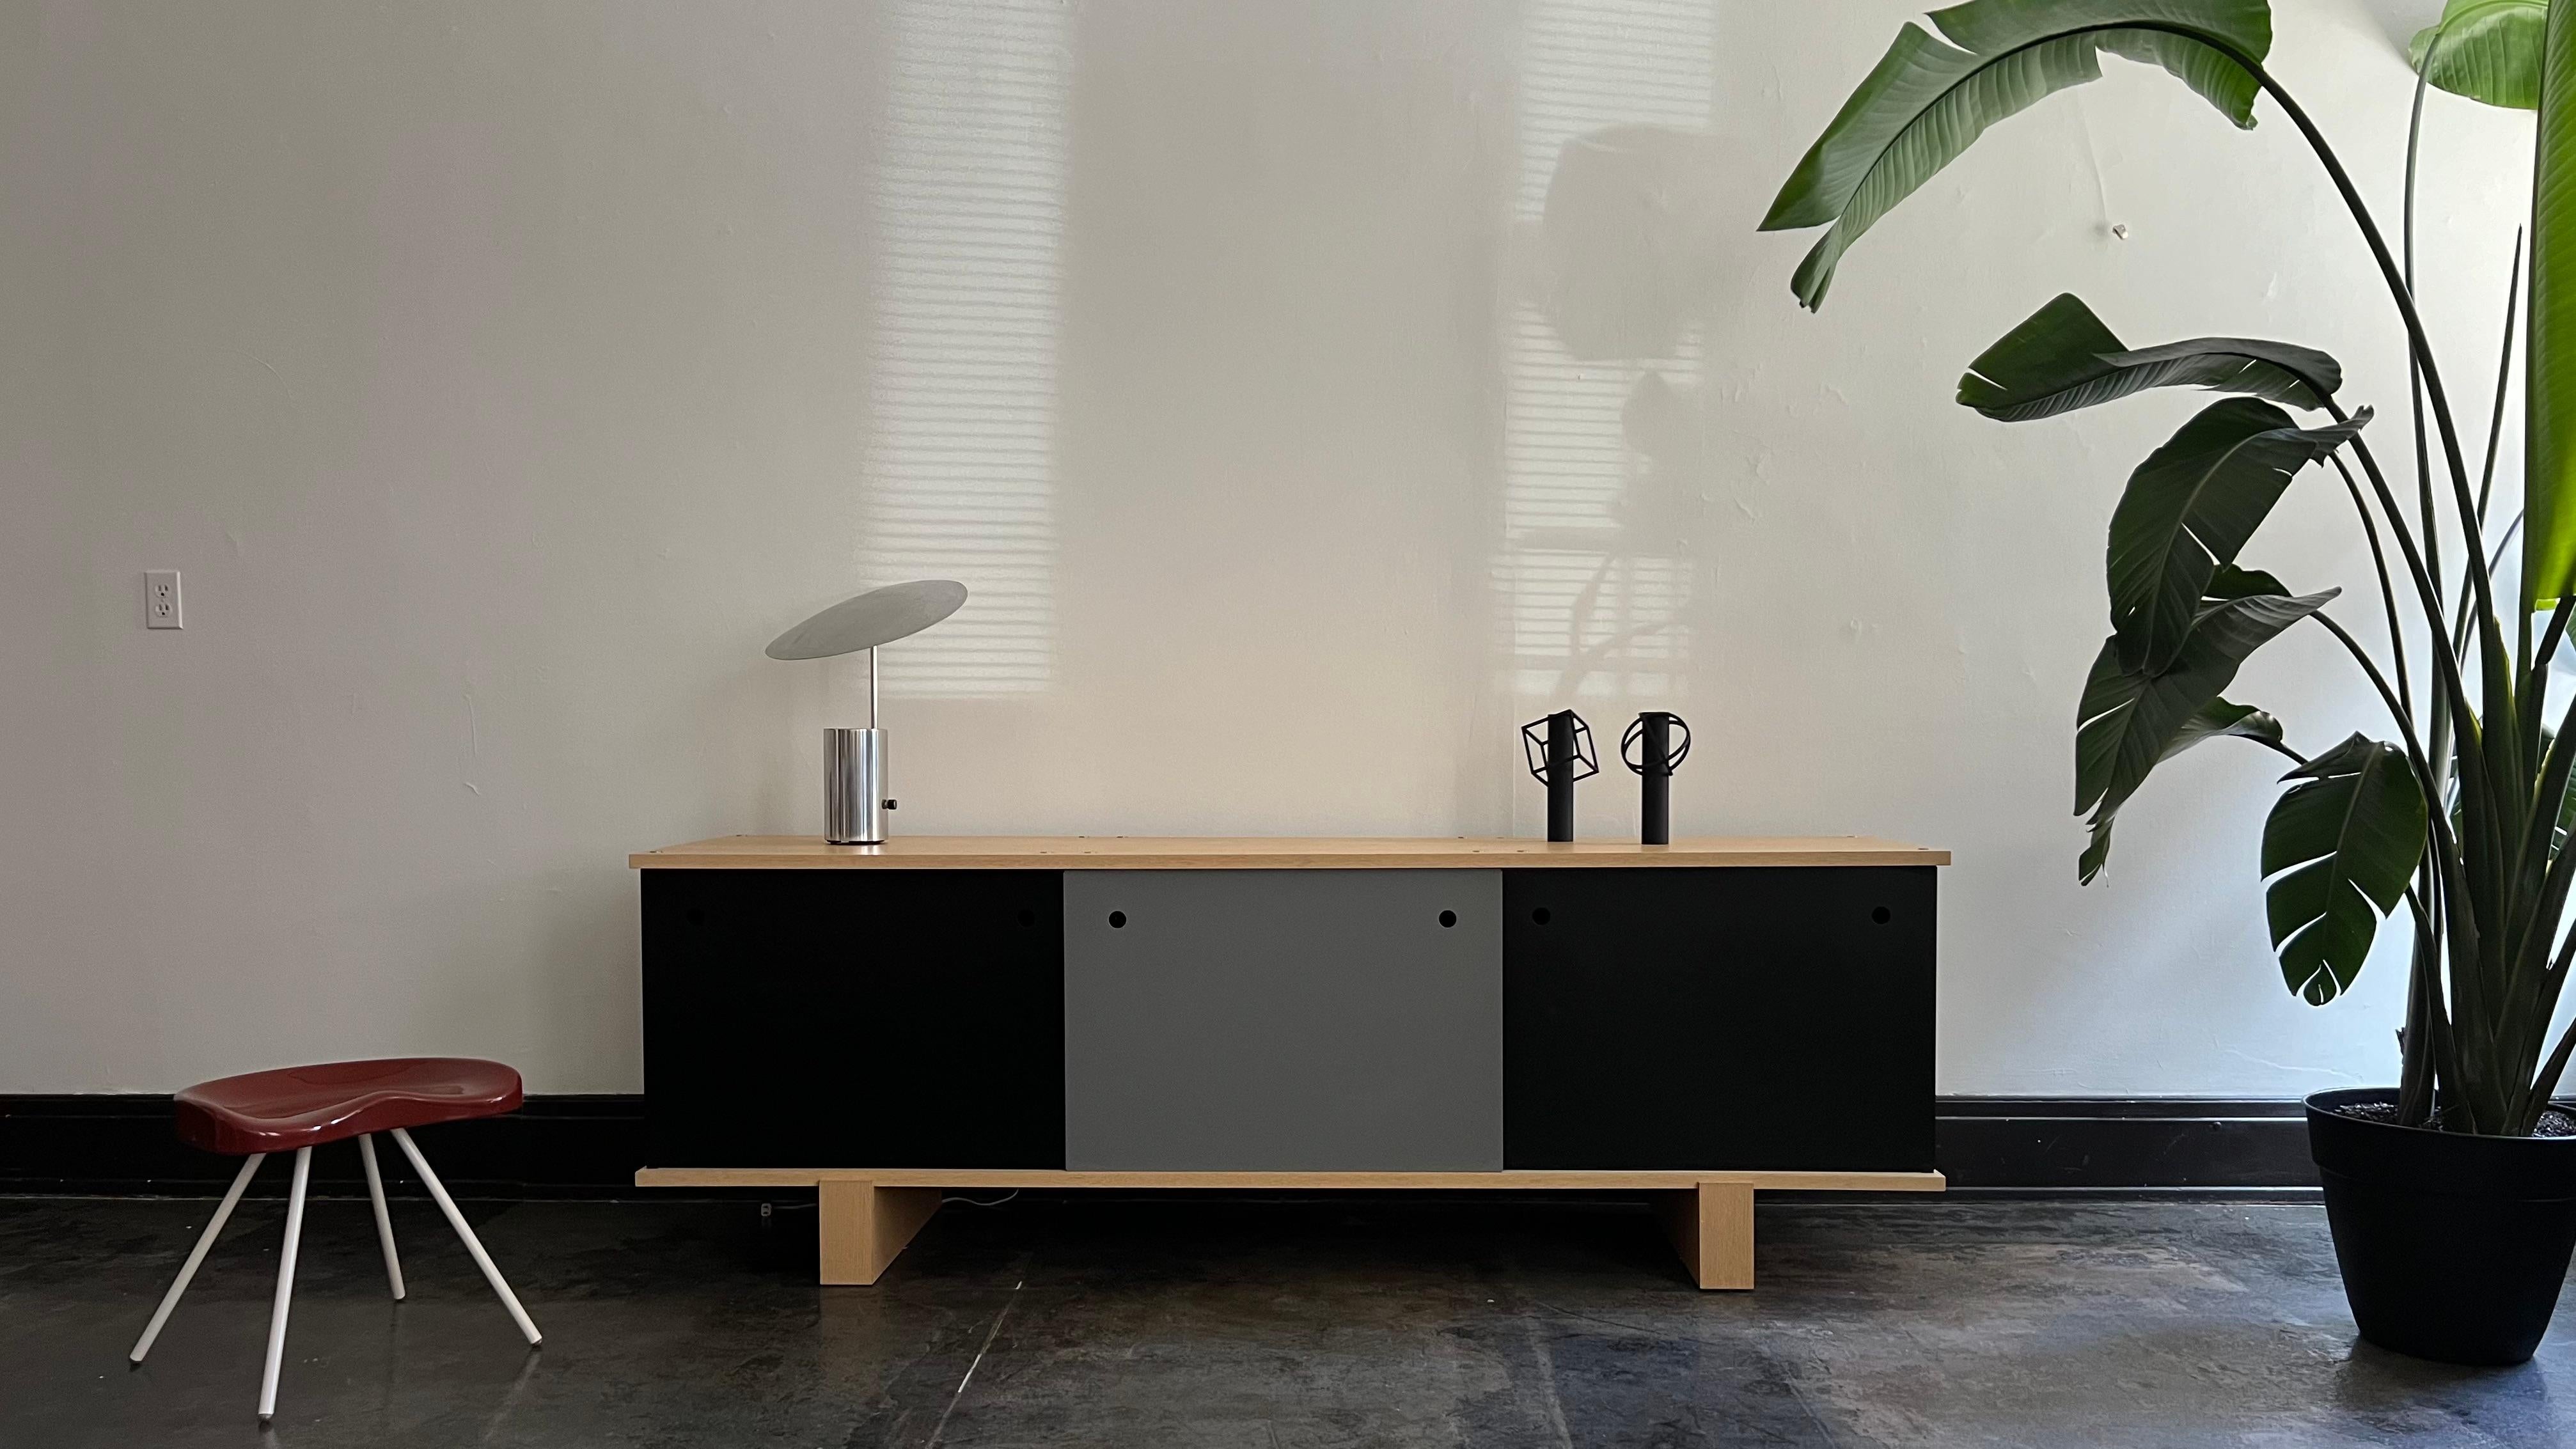 The Nuage Bloc Bahut implements Charlotte Perriand's system of modularity into a credenza. Simple at its core, the Nuage Bloc Bahut consists of individual vertical metal components and oak horizontal components, connected by threaded rods at the